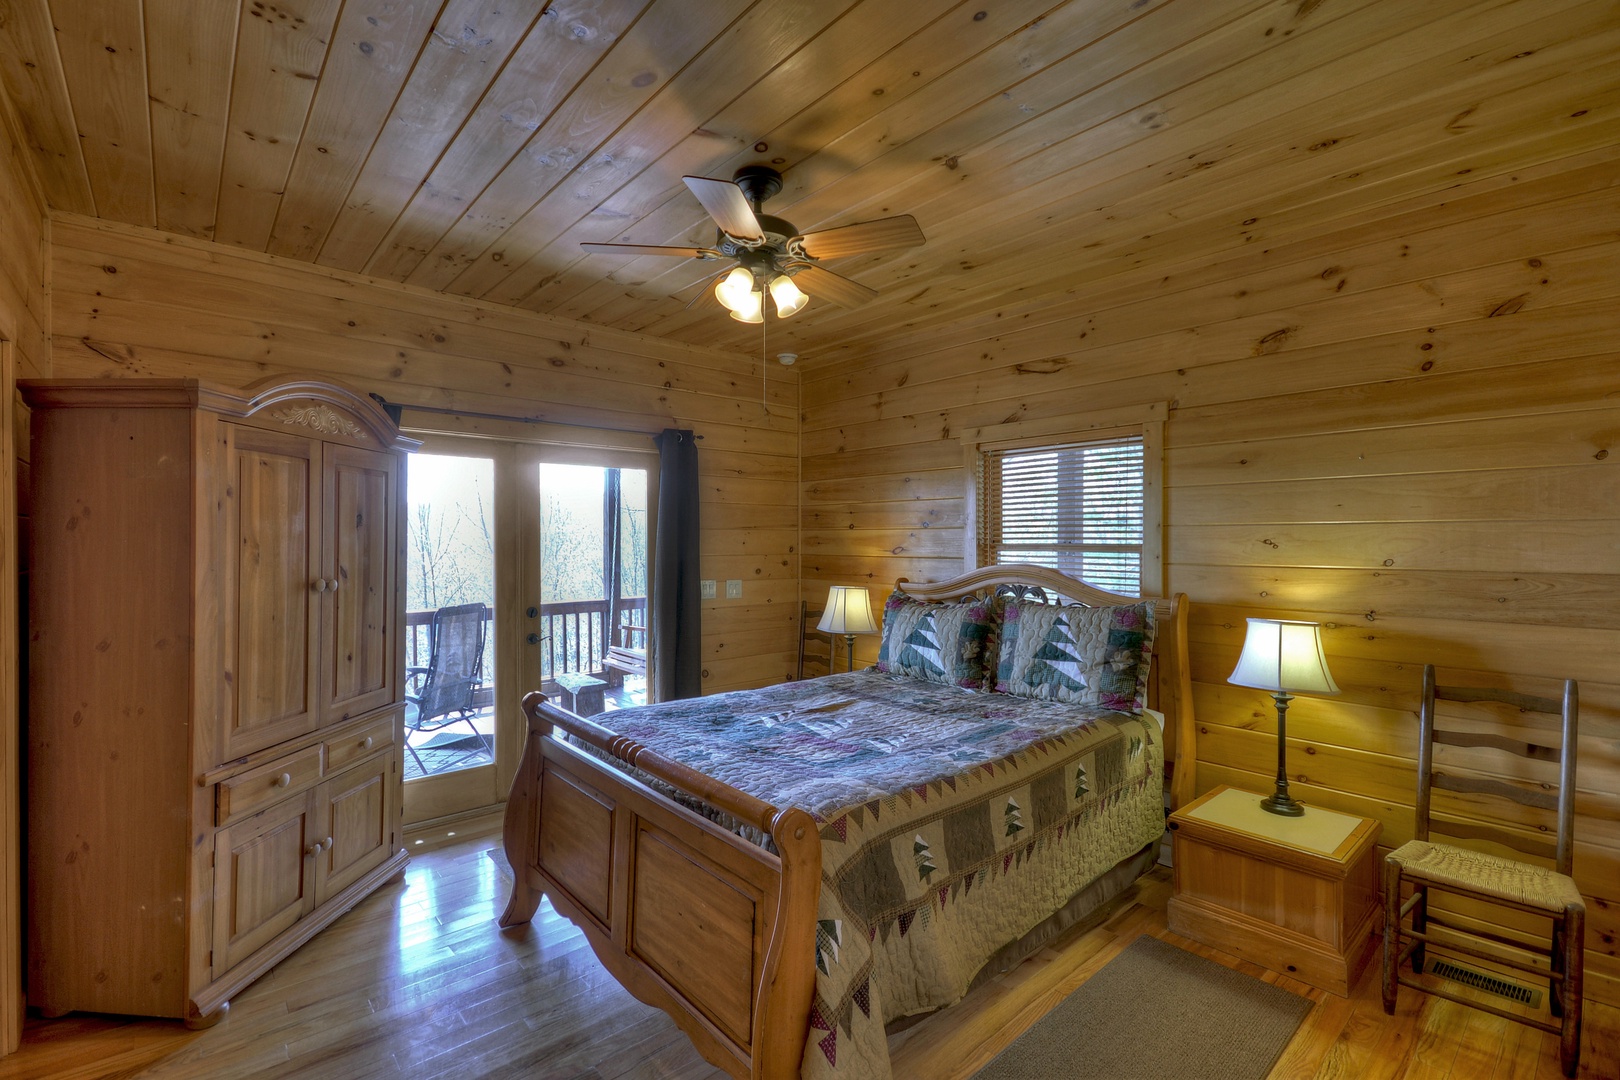 Blue Jay Cabin- Entry level queen bedroom